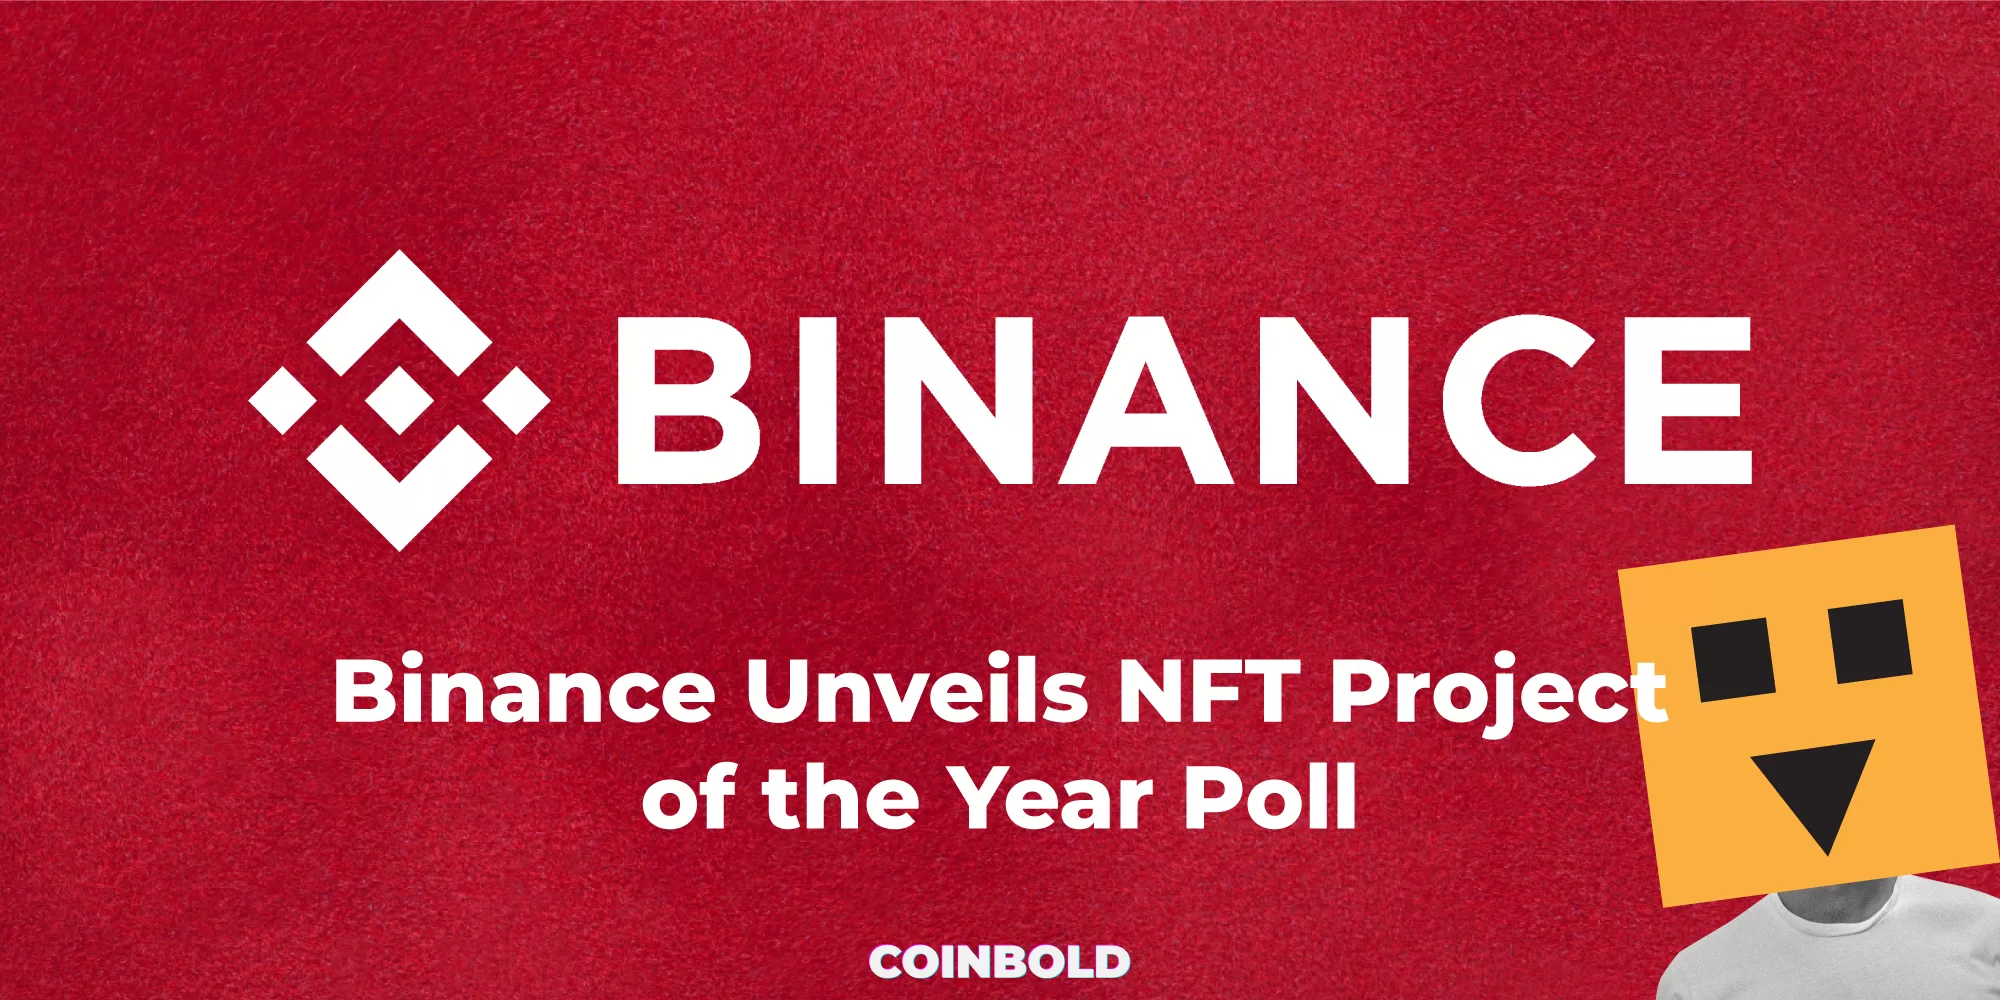 Binance Unveils NFT Project of the Year Poll